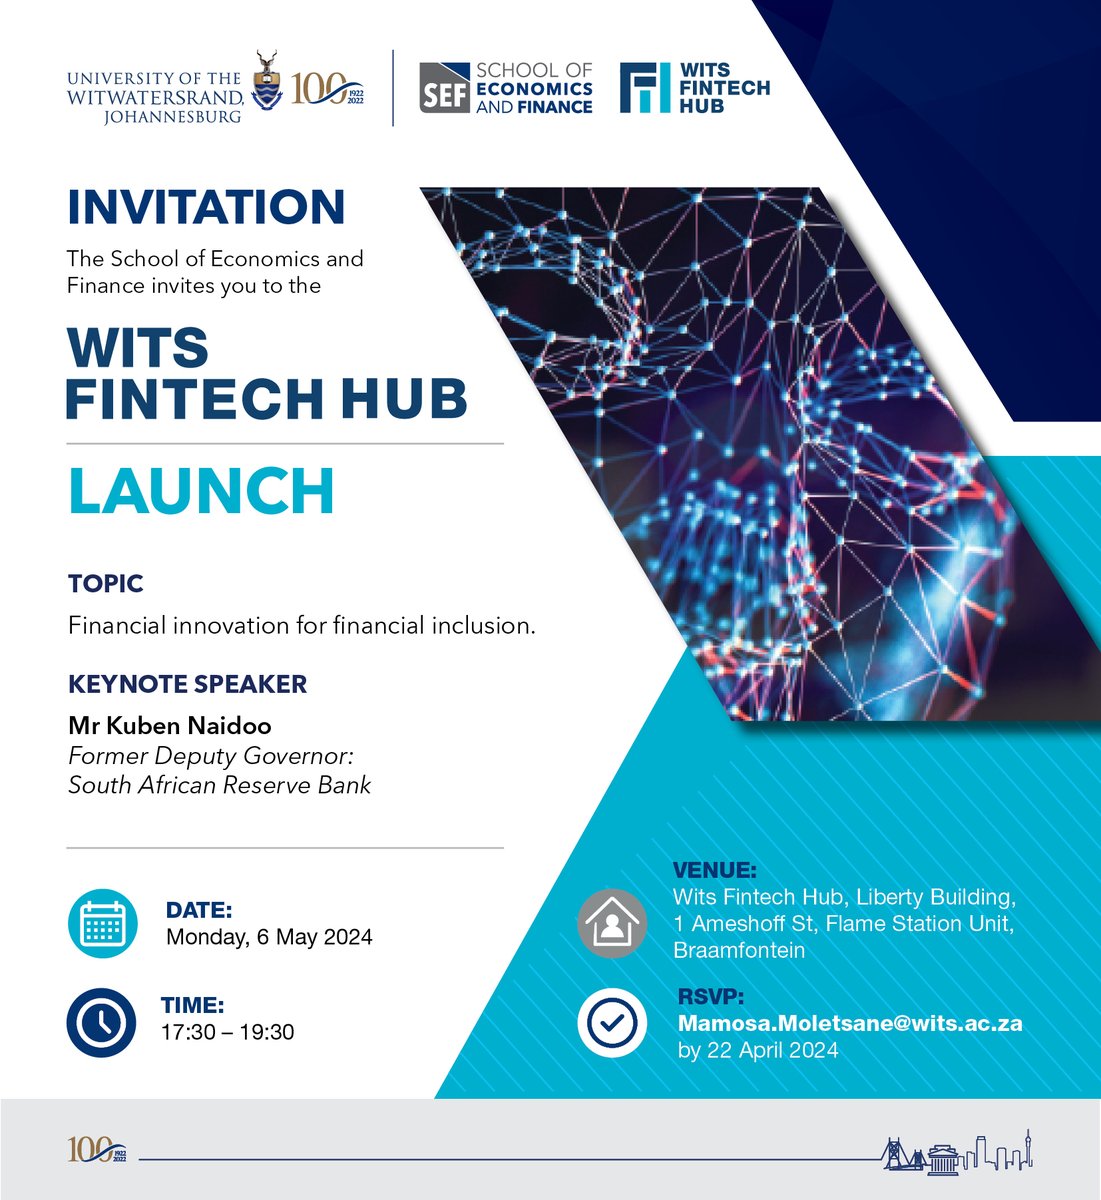 INVITATION🚨 | You are invited to the Wits Fintech Hub Launch at Wits University. Topic: Financial innovation for financial inclusion Date: 06 May 2024 RSVP by: 22 April 2024 RSVP: Mamosa.Moletsane@wits.ac.za Time: 17:30 Venue: Wits Fintech Hub, Liberty Building #WitsForGood